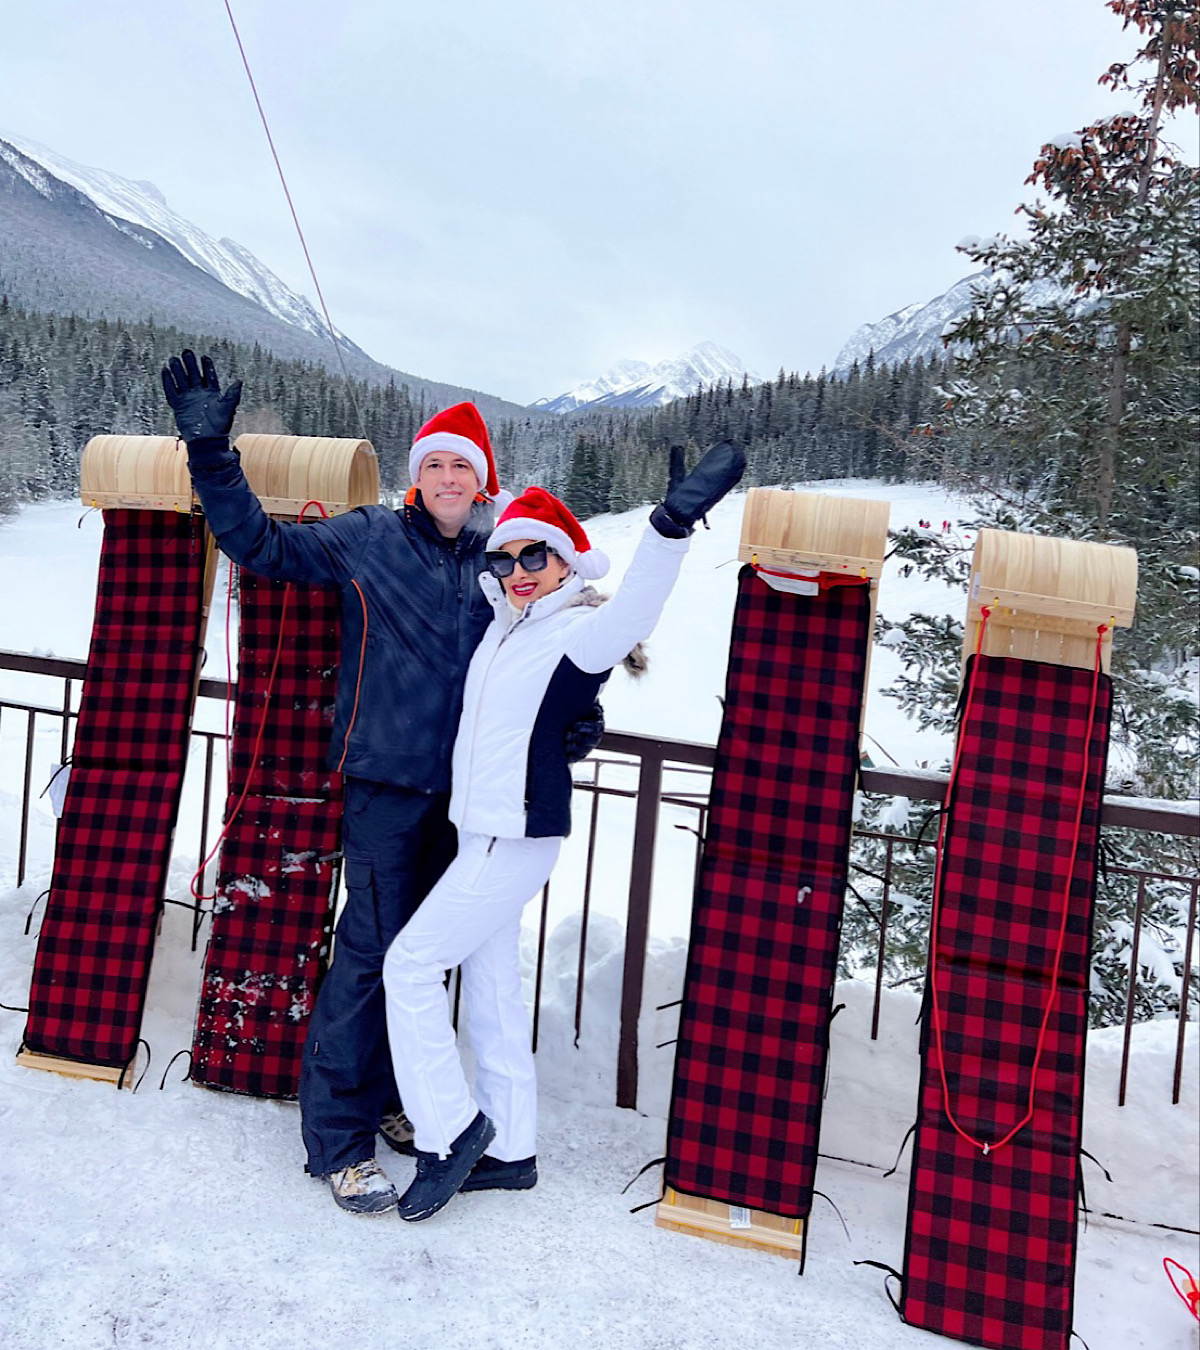 Christmas in Banff: 19 Best Things to Do in Banff During Winter!